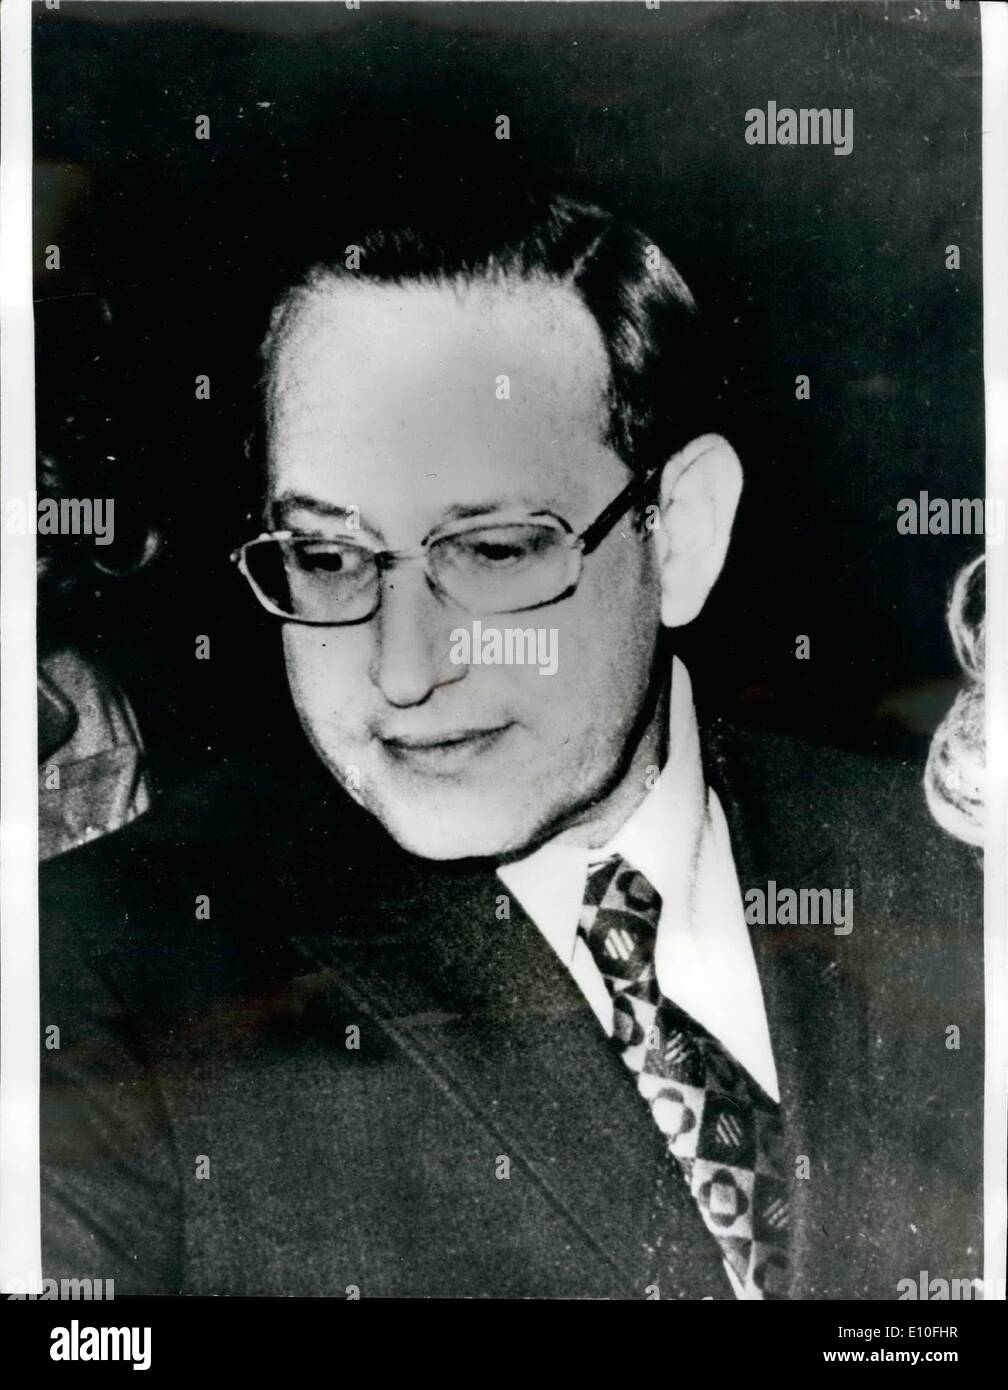 Sep. 09, 1972 - An Israeli diplomat is killed as a booby-trap bomb explodes in the Israeli embassy in London: A diplomat was killed at the Israeli embassy in kensington today after opening a booby-trap letter bomb that exploded in his face. He was Dr. Ami Shachori, 40. counselor for agriculture, who has been based in London fr four years. there was immediate speculation the the black September Arab terrorist organization, responsible for the Munich massacre, was behind the killing. photo shows The victim Dr Stock Photo